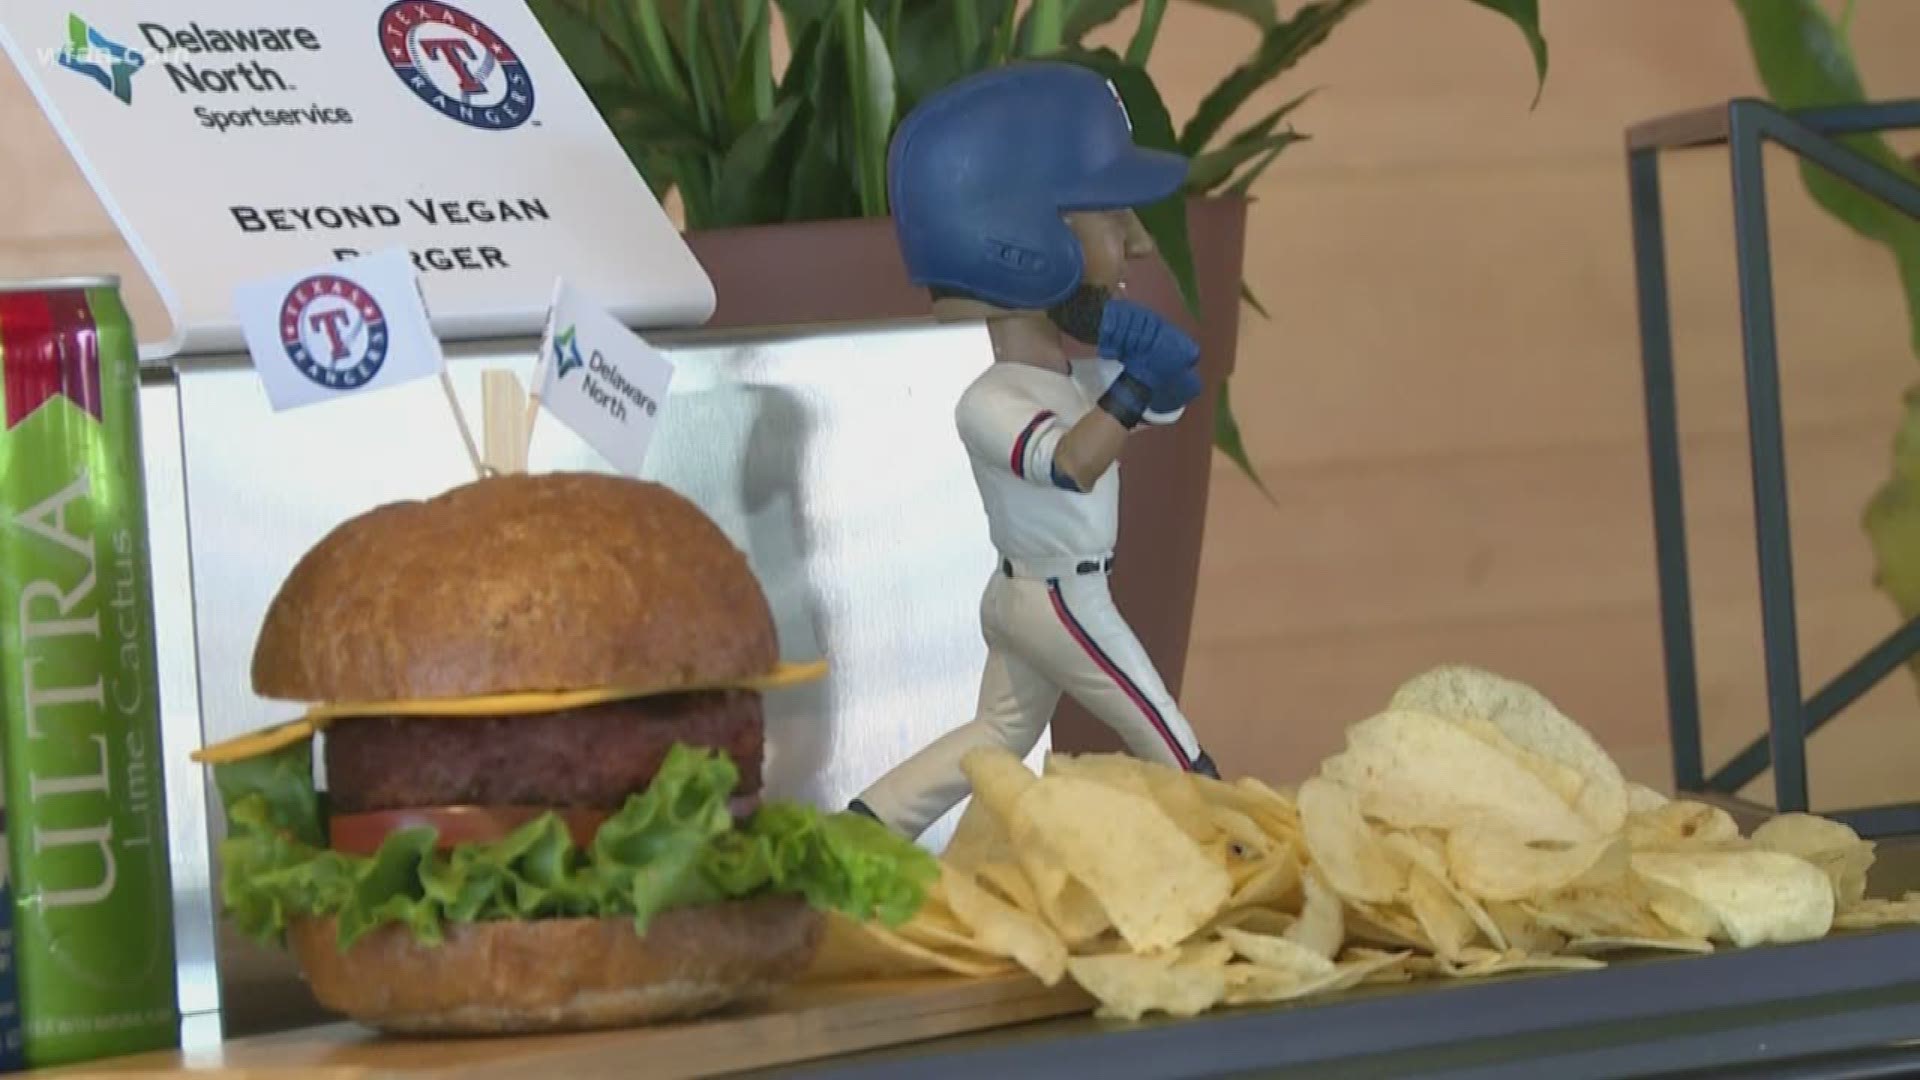 Baseball fans and foodies will have a lot of tasty options this season at Globe Life Park in Arlington.